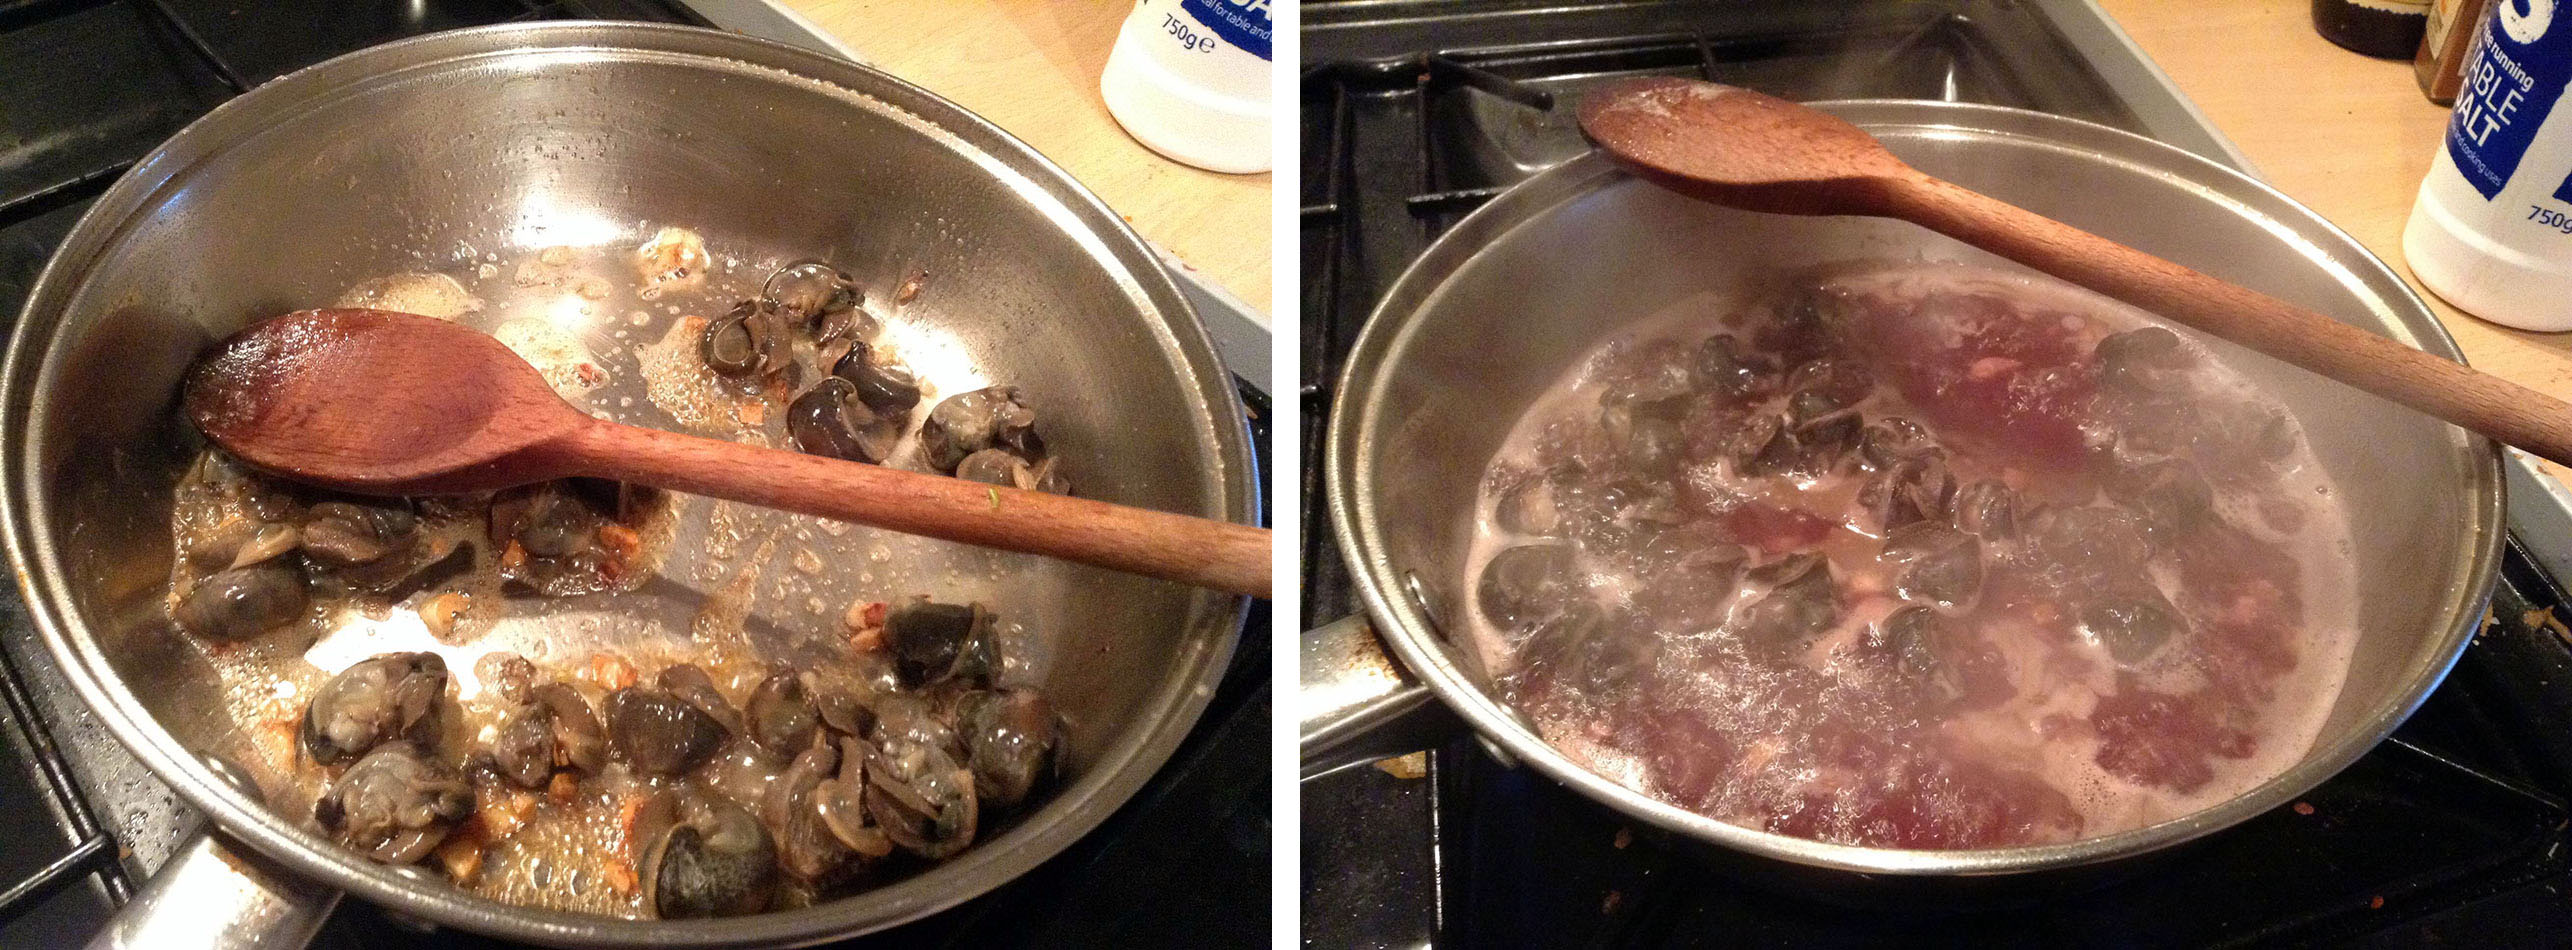 Left: Frying in butter and garlic. Right: Wine and seasoning added.